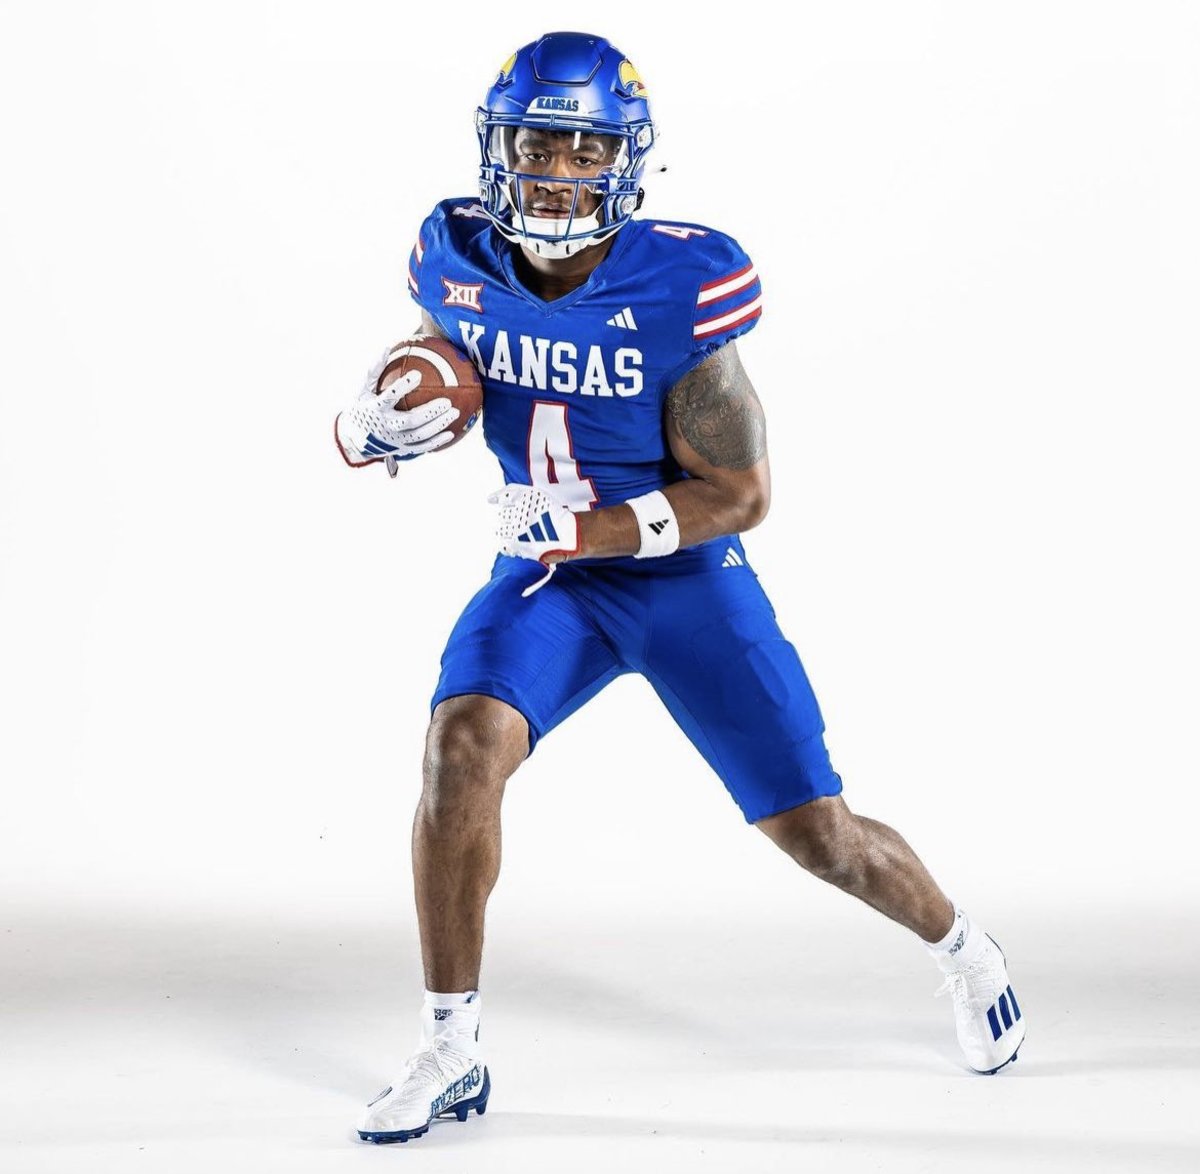 Kansas football uniform choices that live rent-free in your head